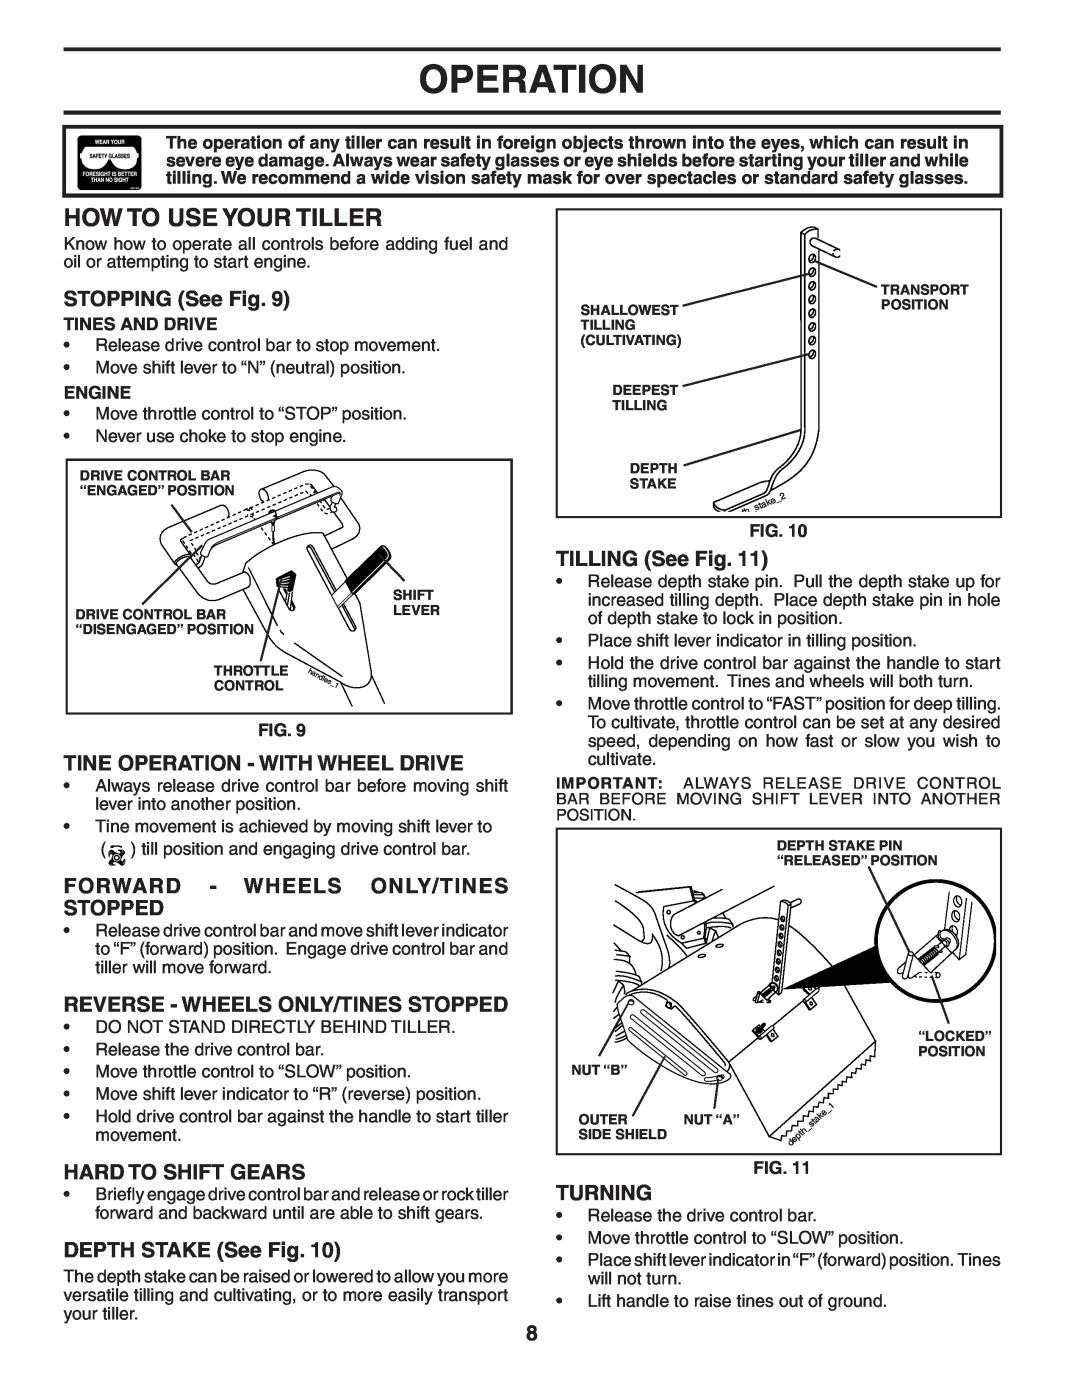 Poulan 403701 How To Use Your Tiller, STOPPING See Fig, Tine Operation - With Wheel Drive, Hard To Shift Gears, Turning 